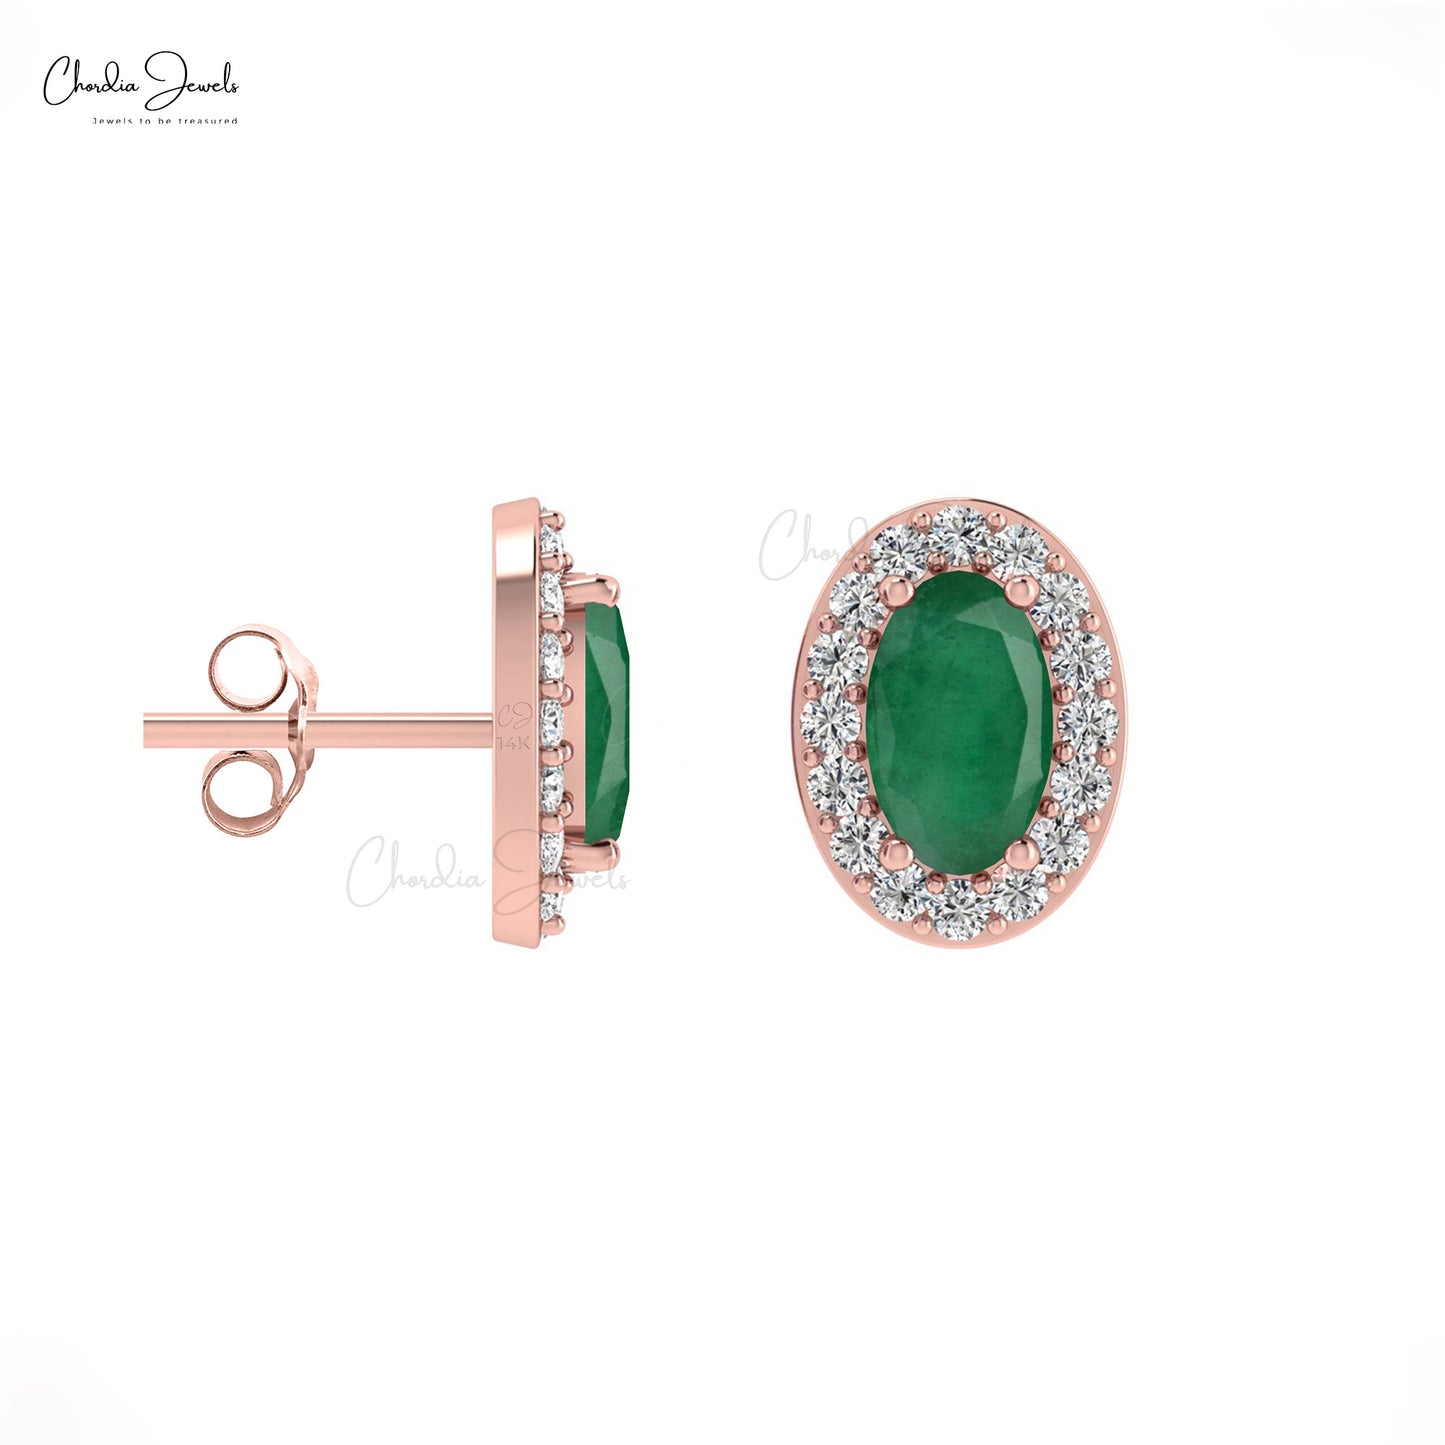 Transform your style with our emerald halo earrings.